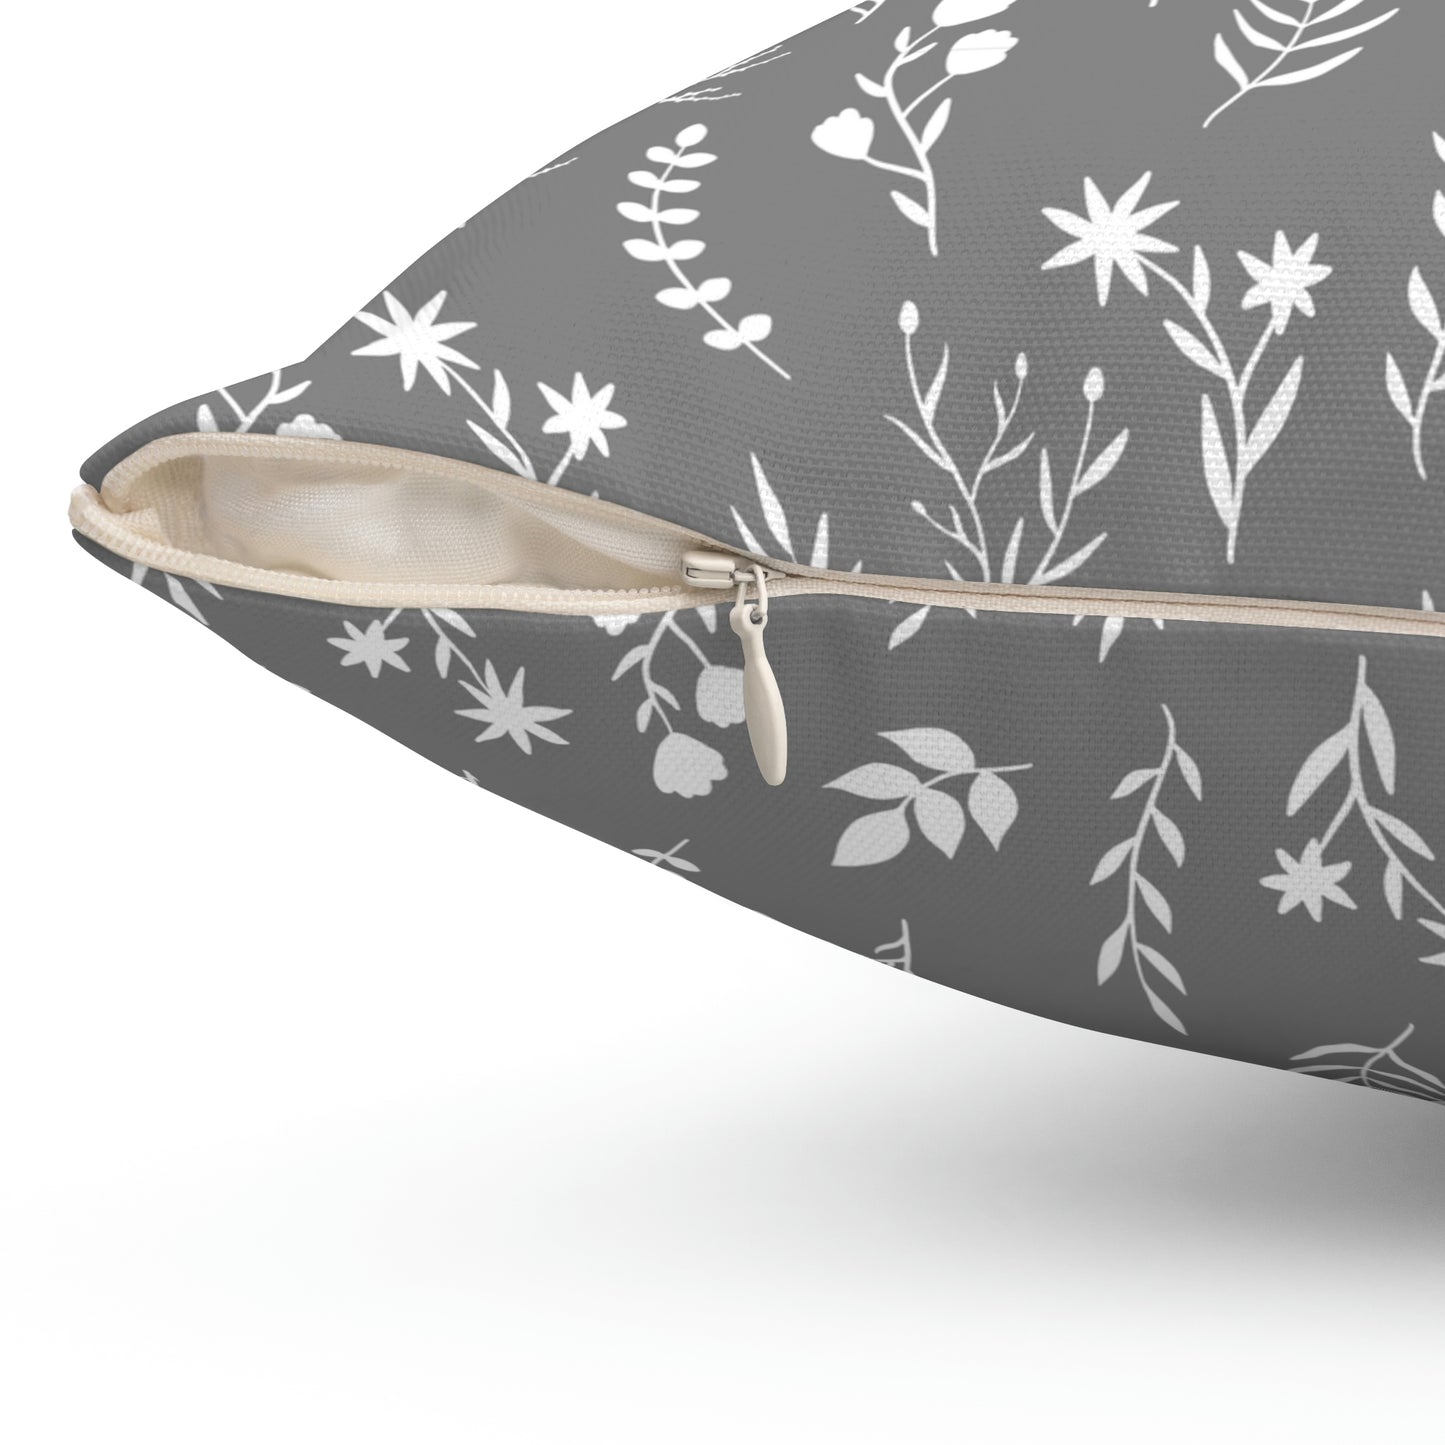 Grey and White Floral Pillow | Available in 4 Sizes